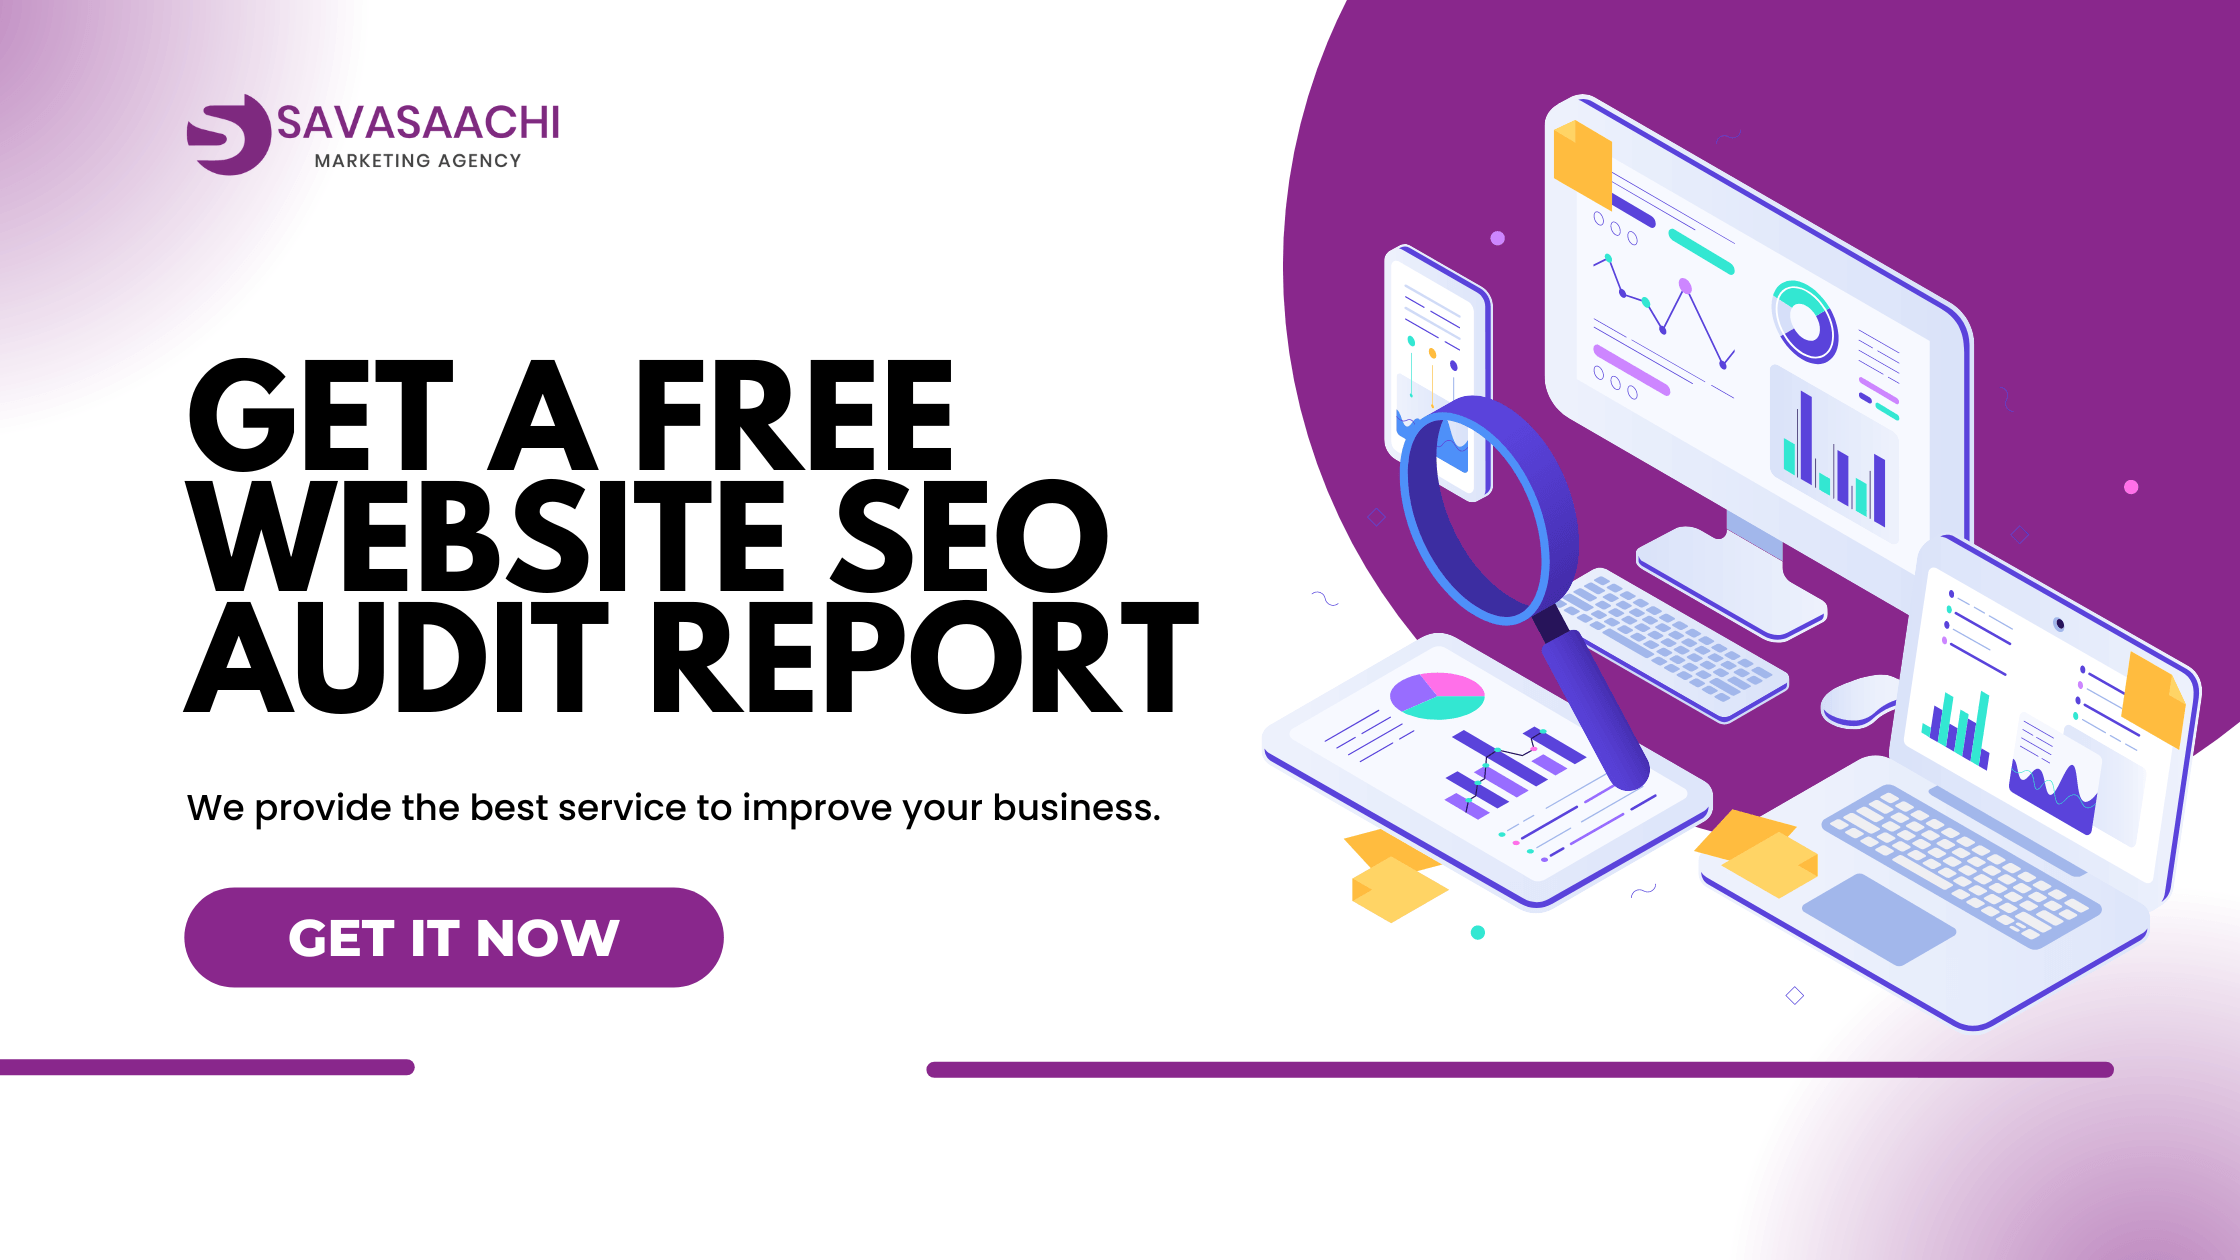 How to Get a Free Website SEO Audit Report?